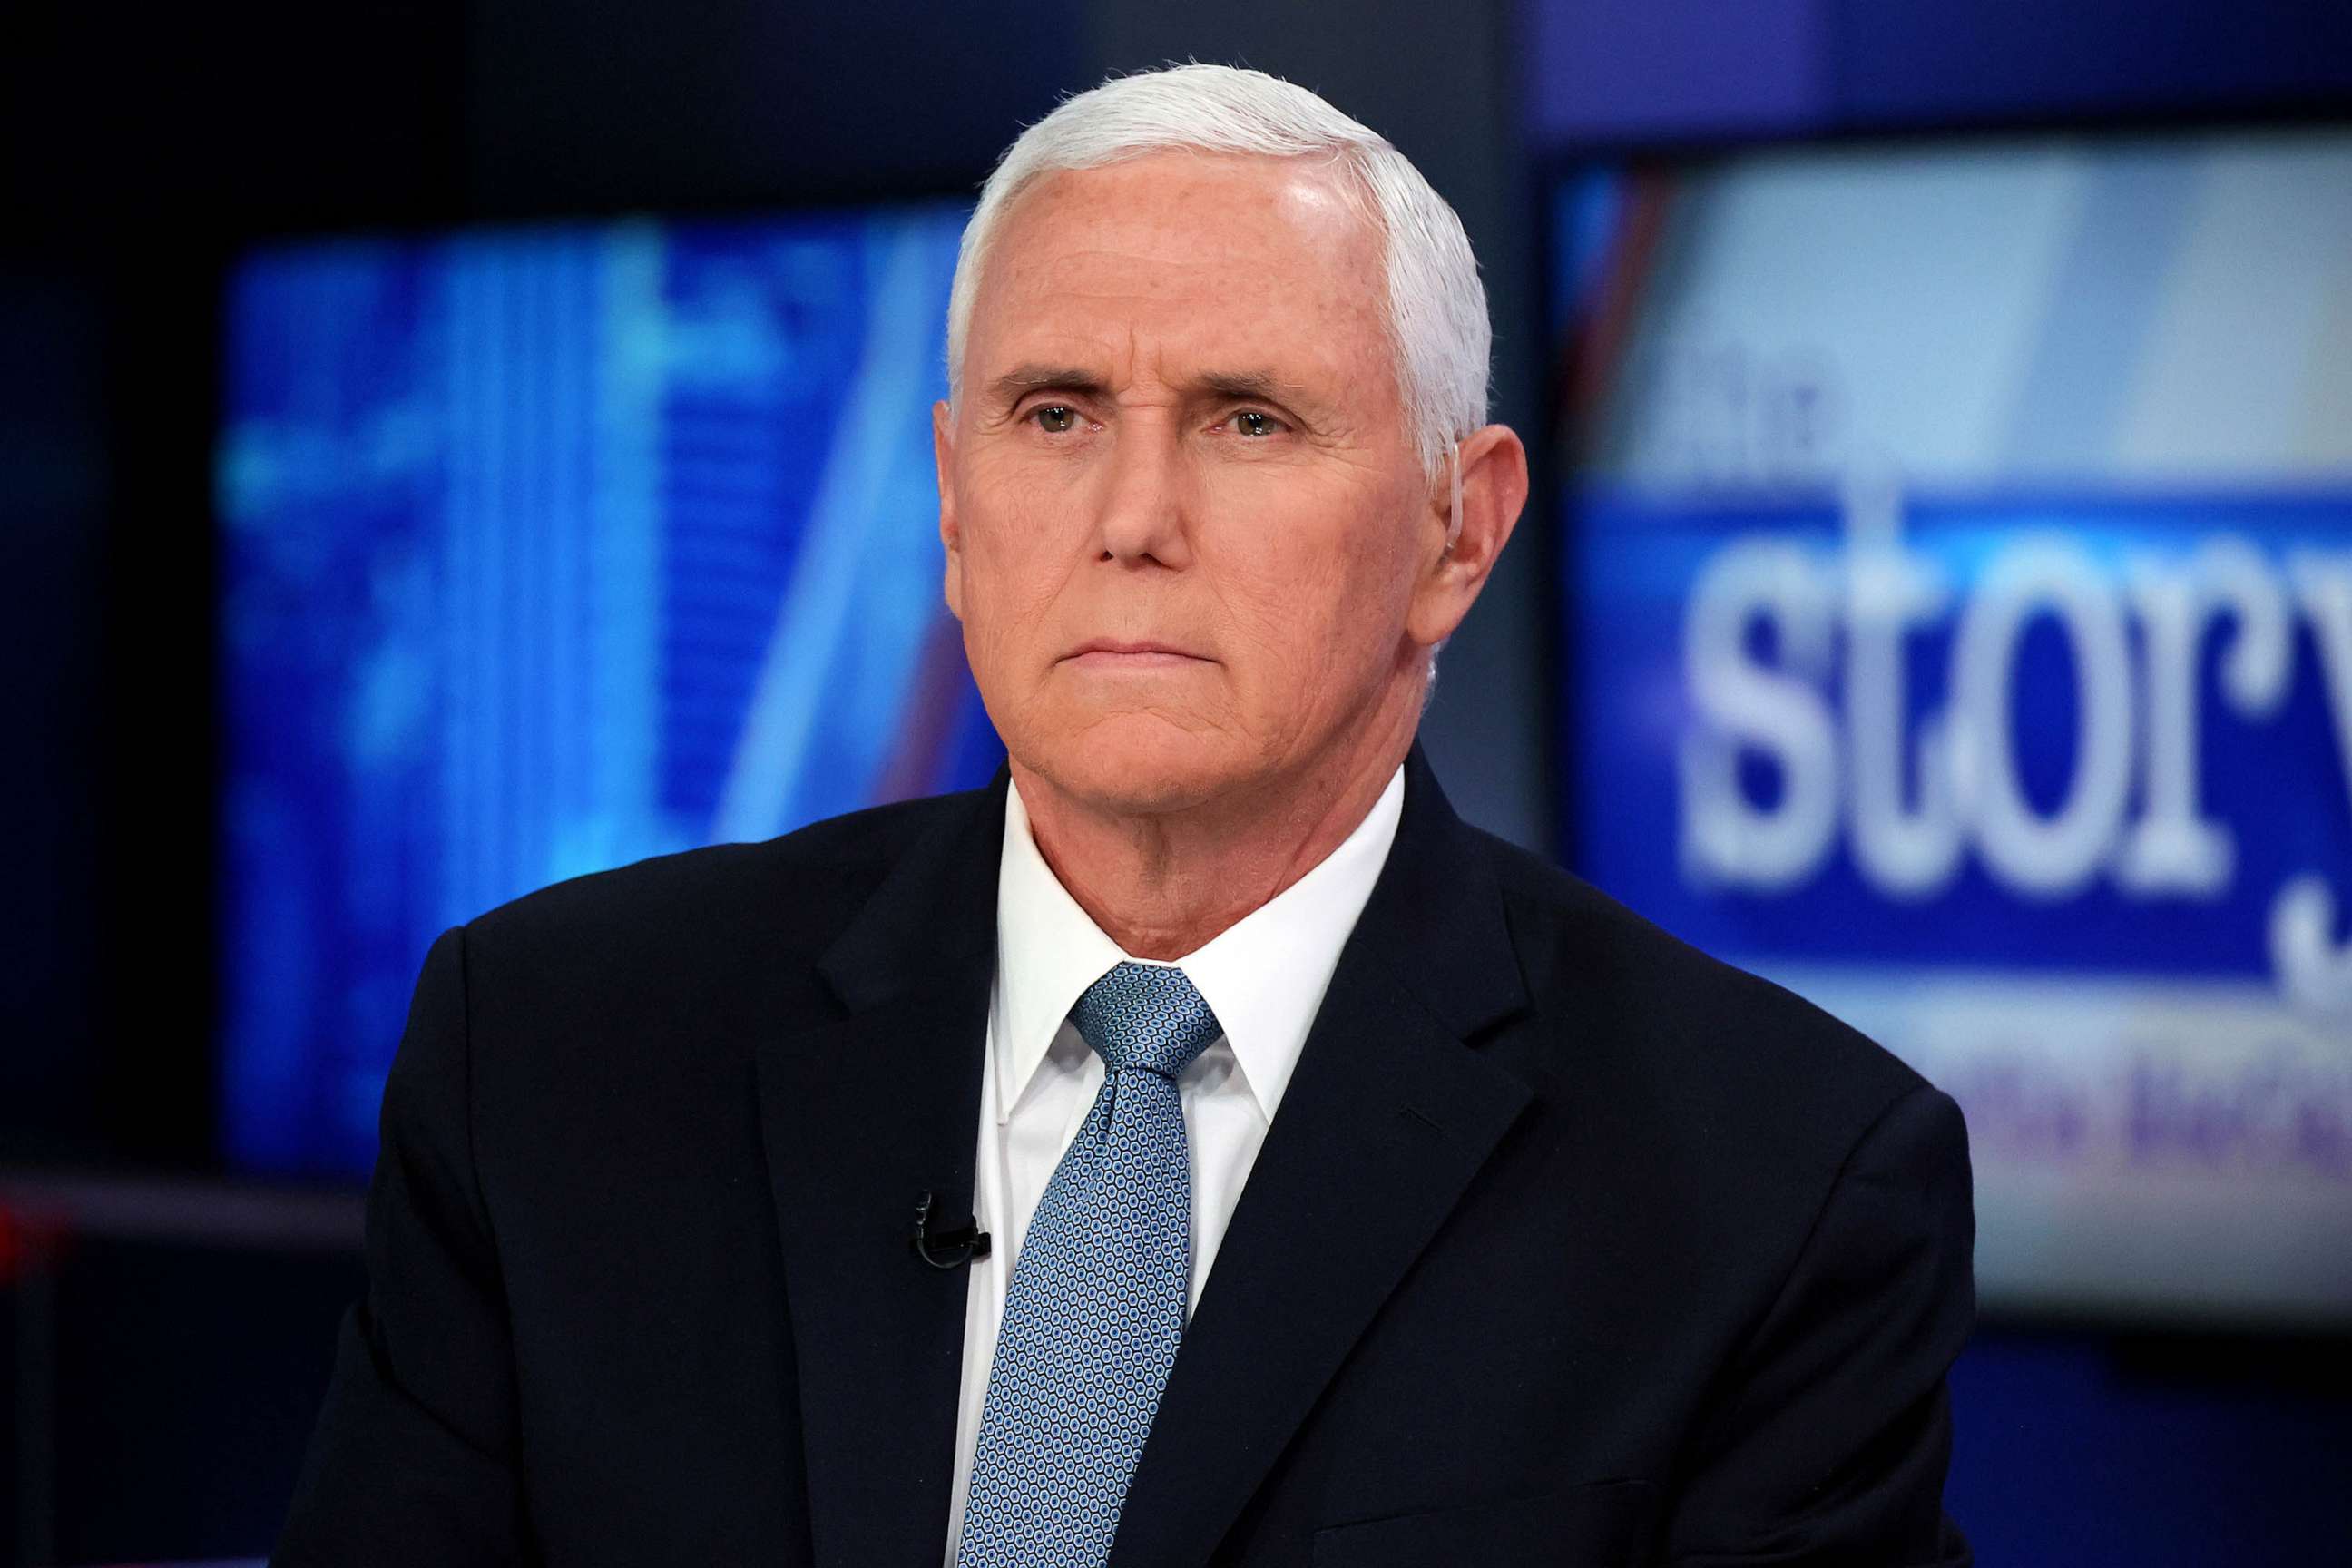 PHOTO: FILE - Mike Pence is seen at Fox News Channel Studios, Feb. 22, 2023 in New York City.